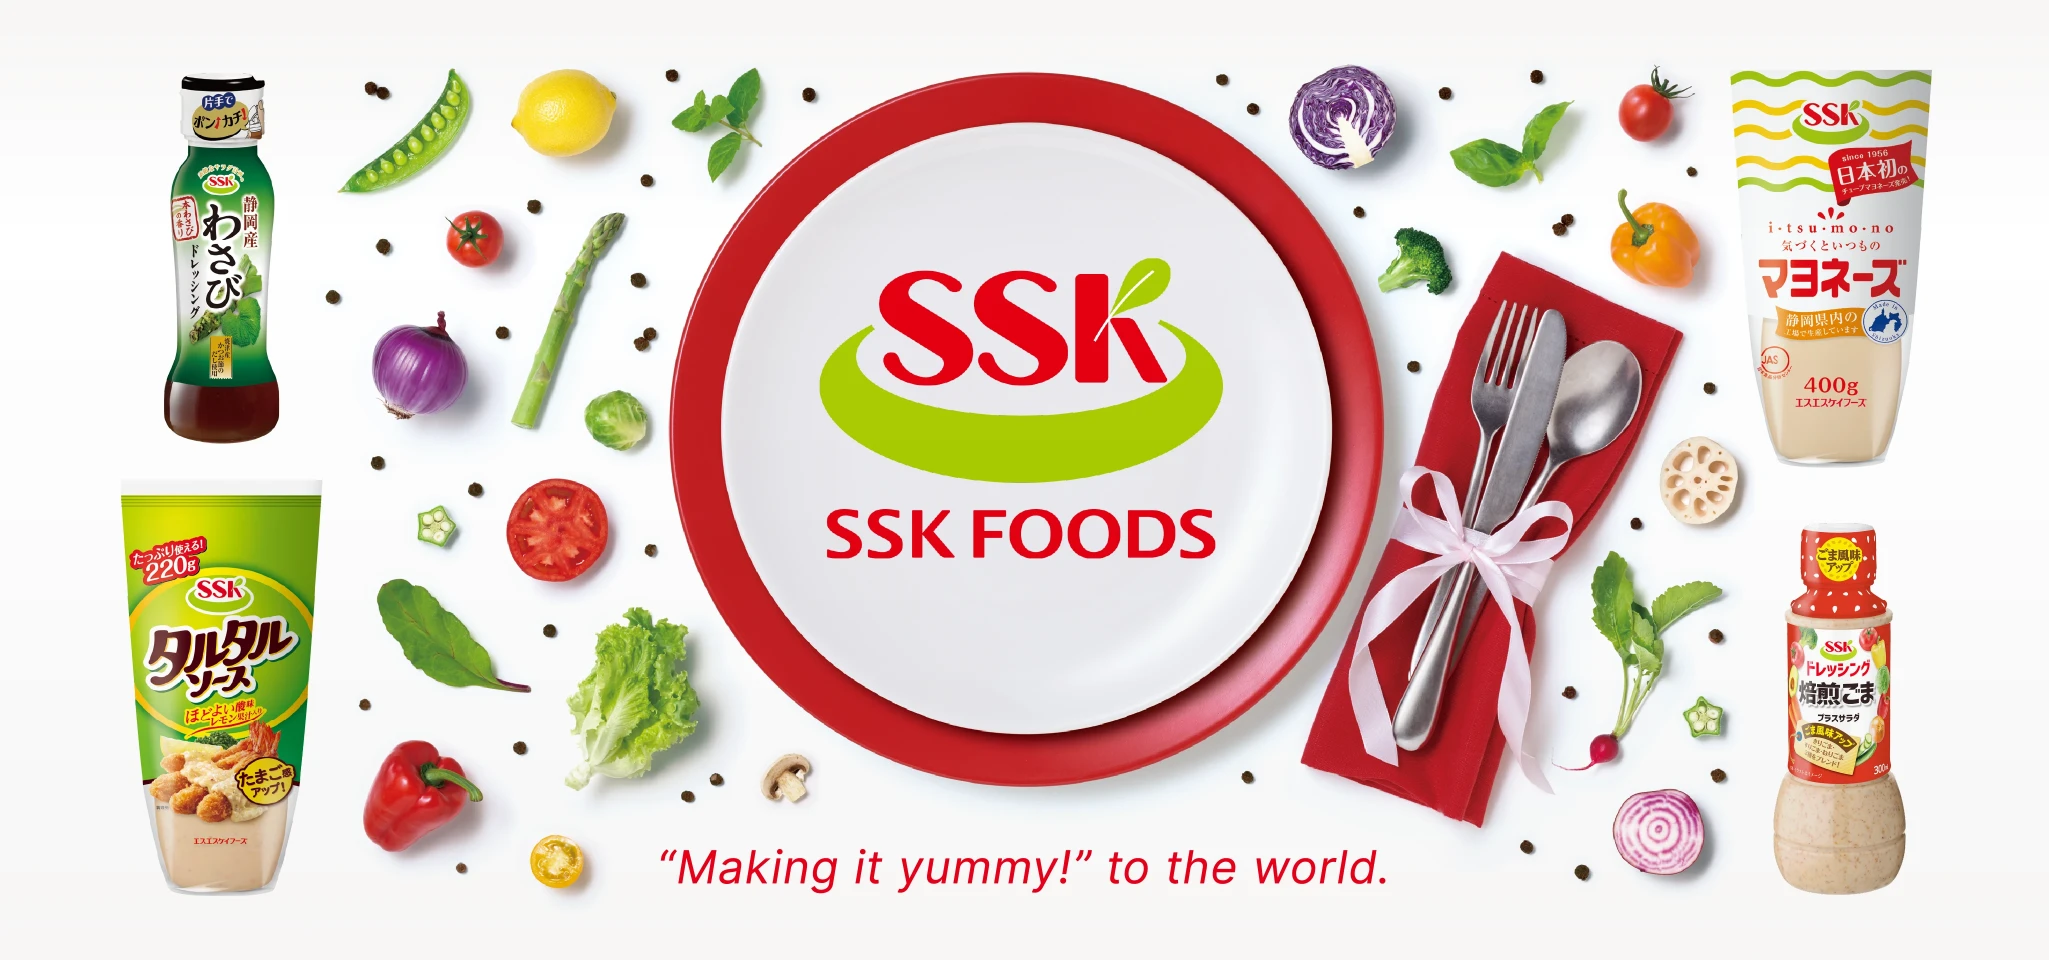 SSK FOODS 'Making it yummy!' to the world.